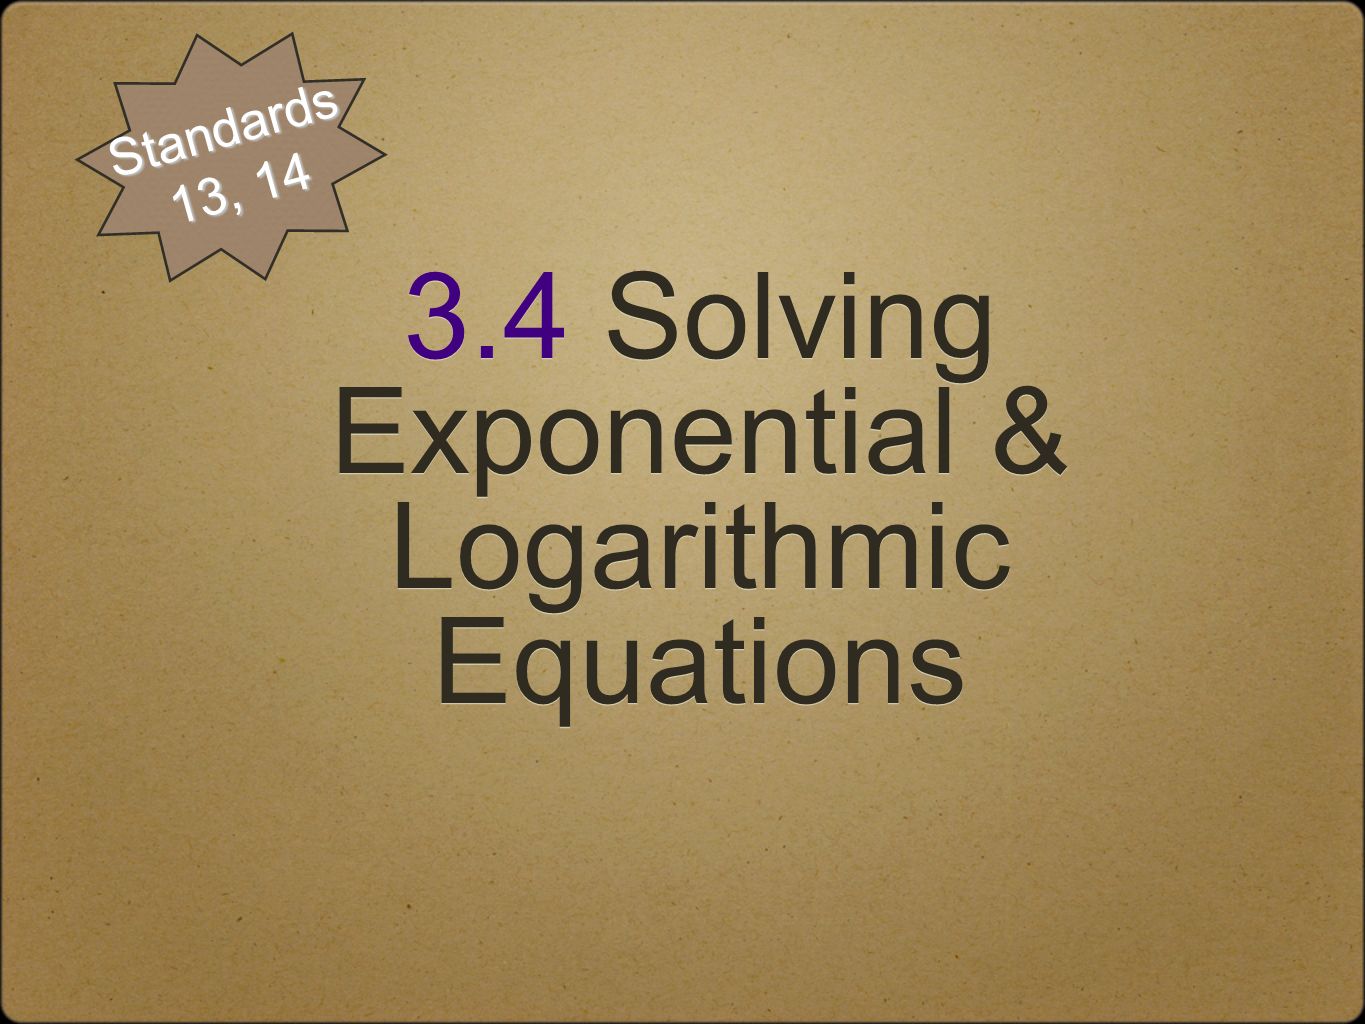 3.4 Solving Exponential & Logarithmic Equations Standards 13, 14